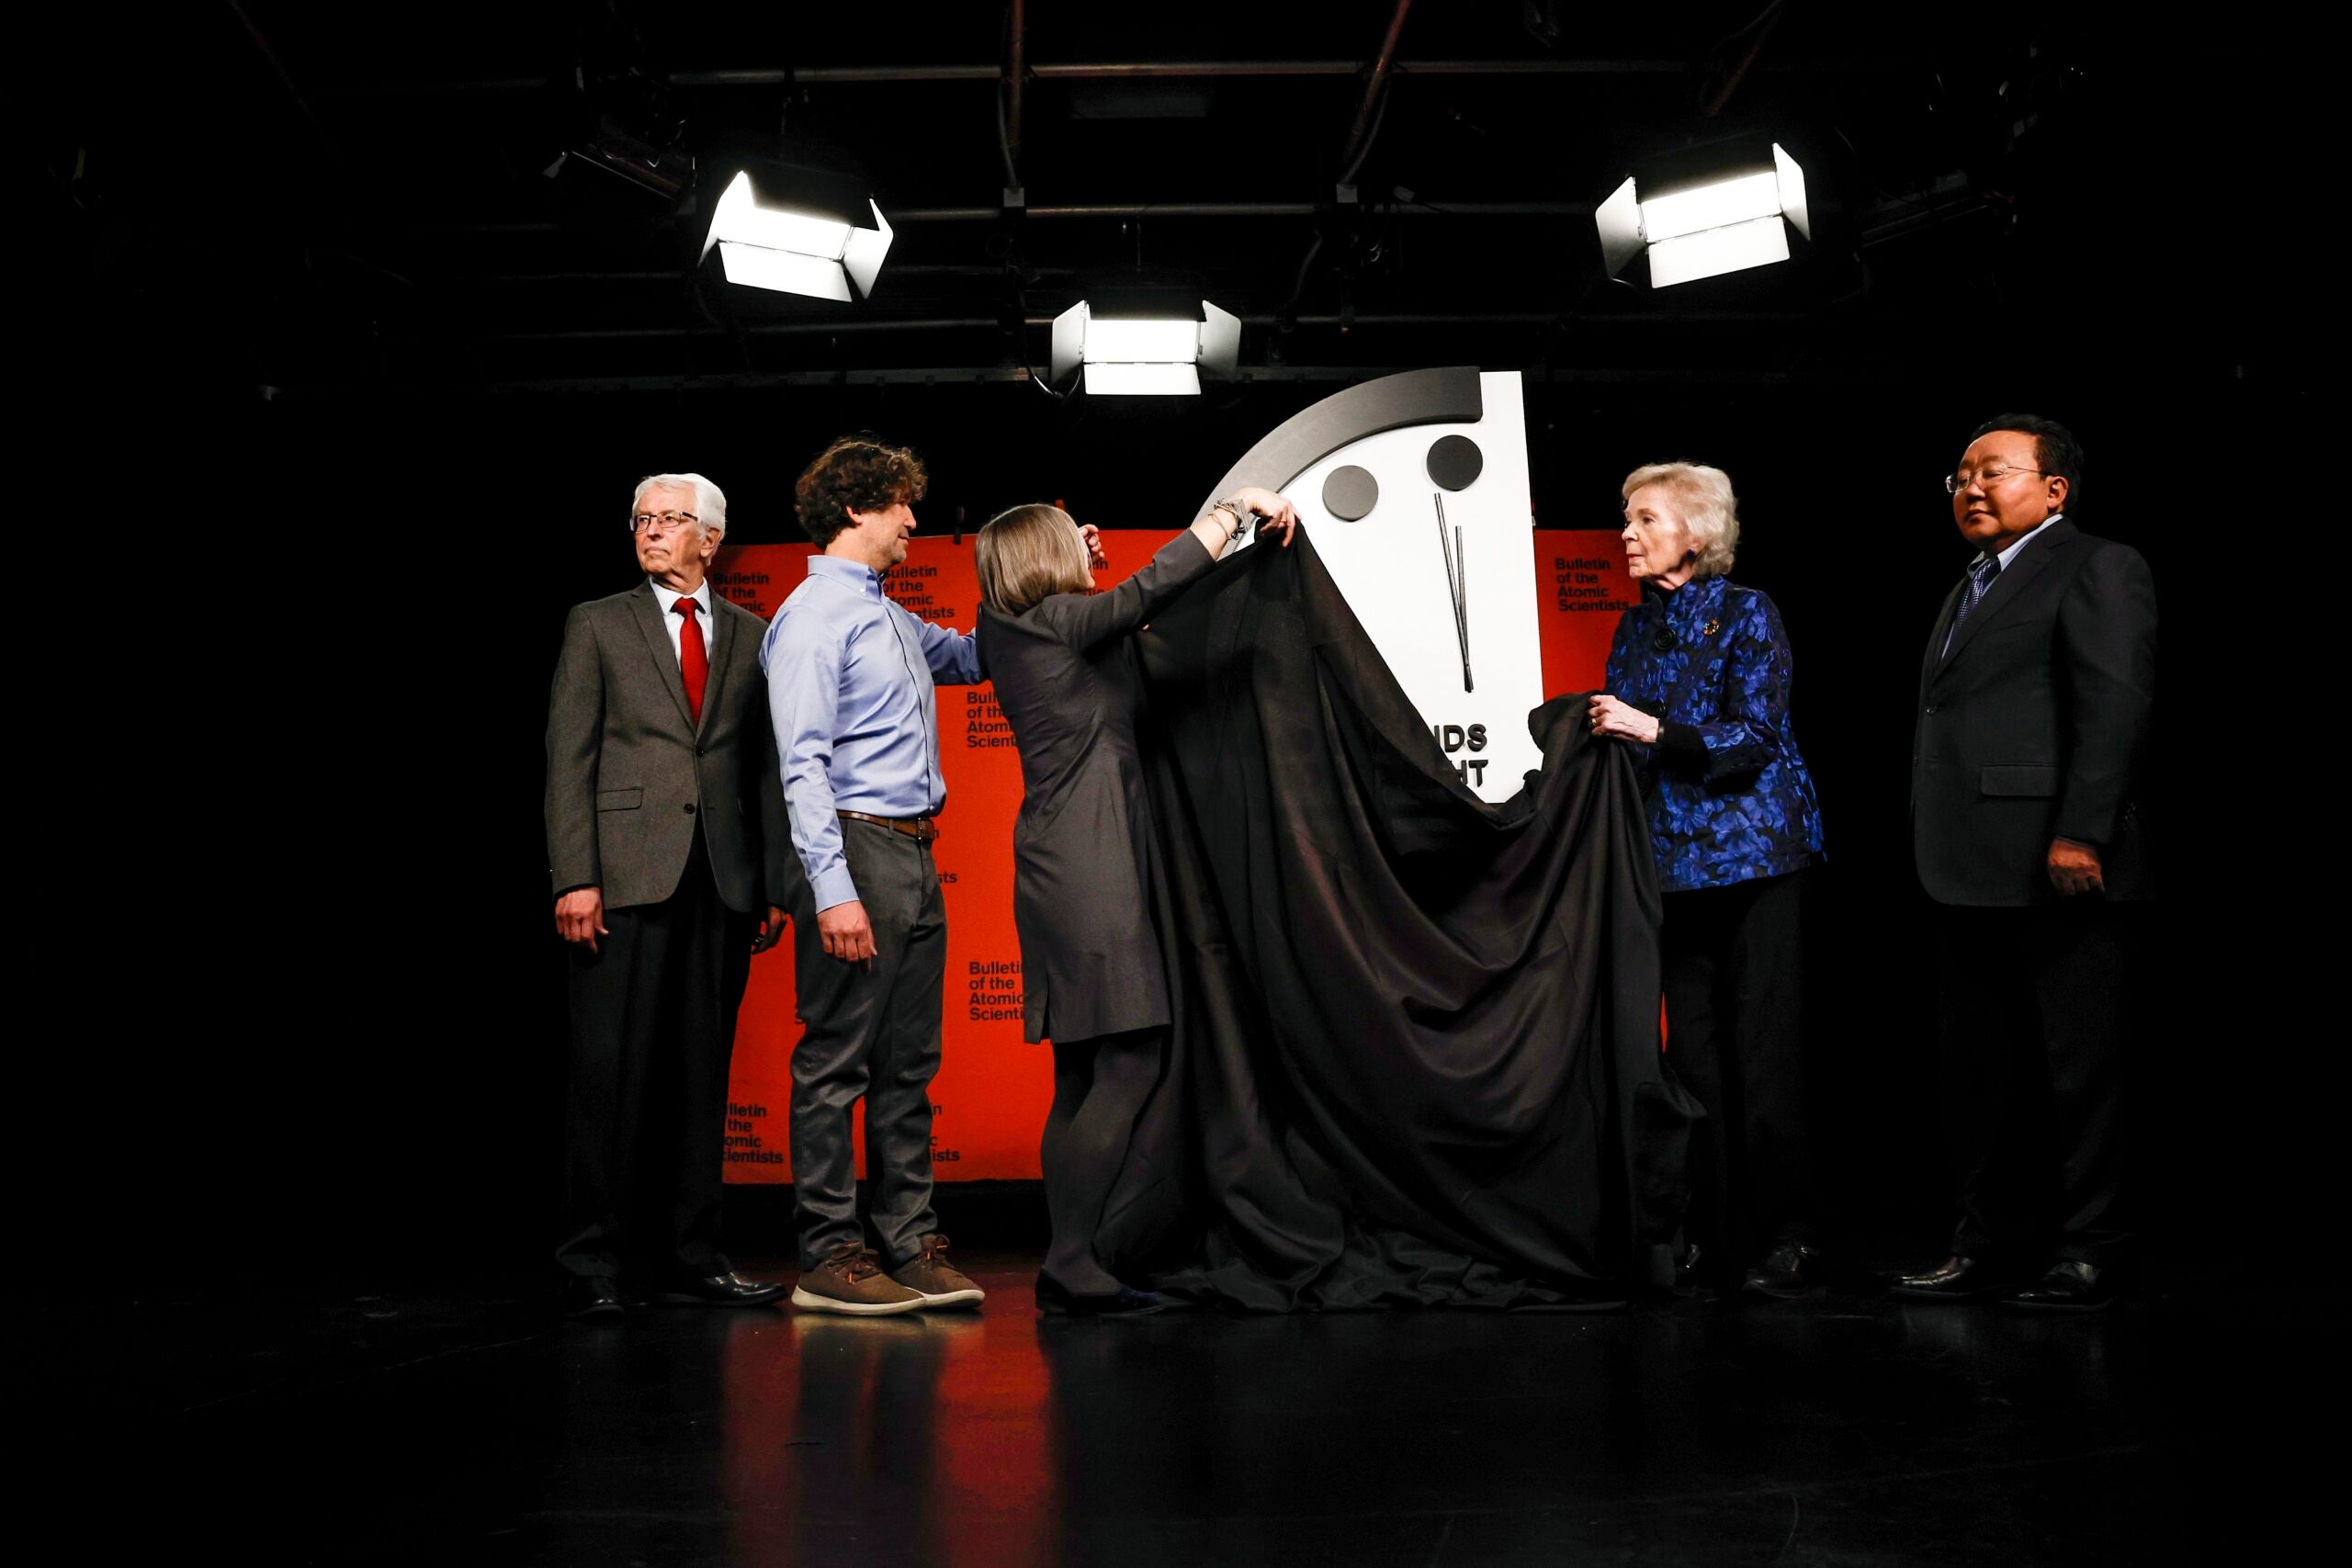 alt = Members of the Bulletin of the Atomic Scientists Siegfried S. Hecker, Daniel Holz, Sharon Squassoni, Mary Robinson and Elbegorj Tsakhia demonstrate unveiling of the 2023 Doomsday Clock ahead of a live-streamed event on January 24, 2023 in Washington, DC.